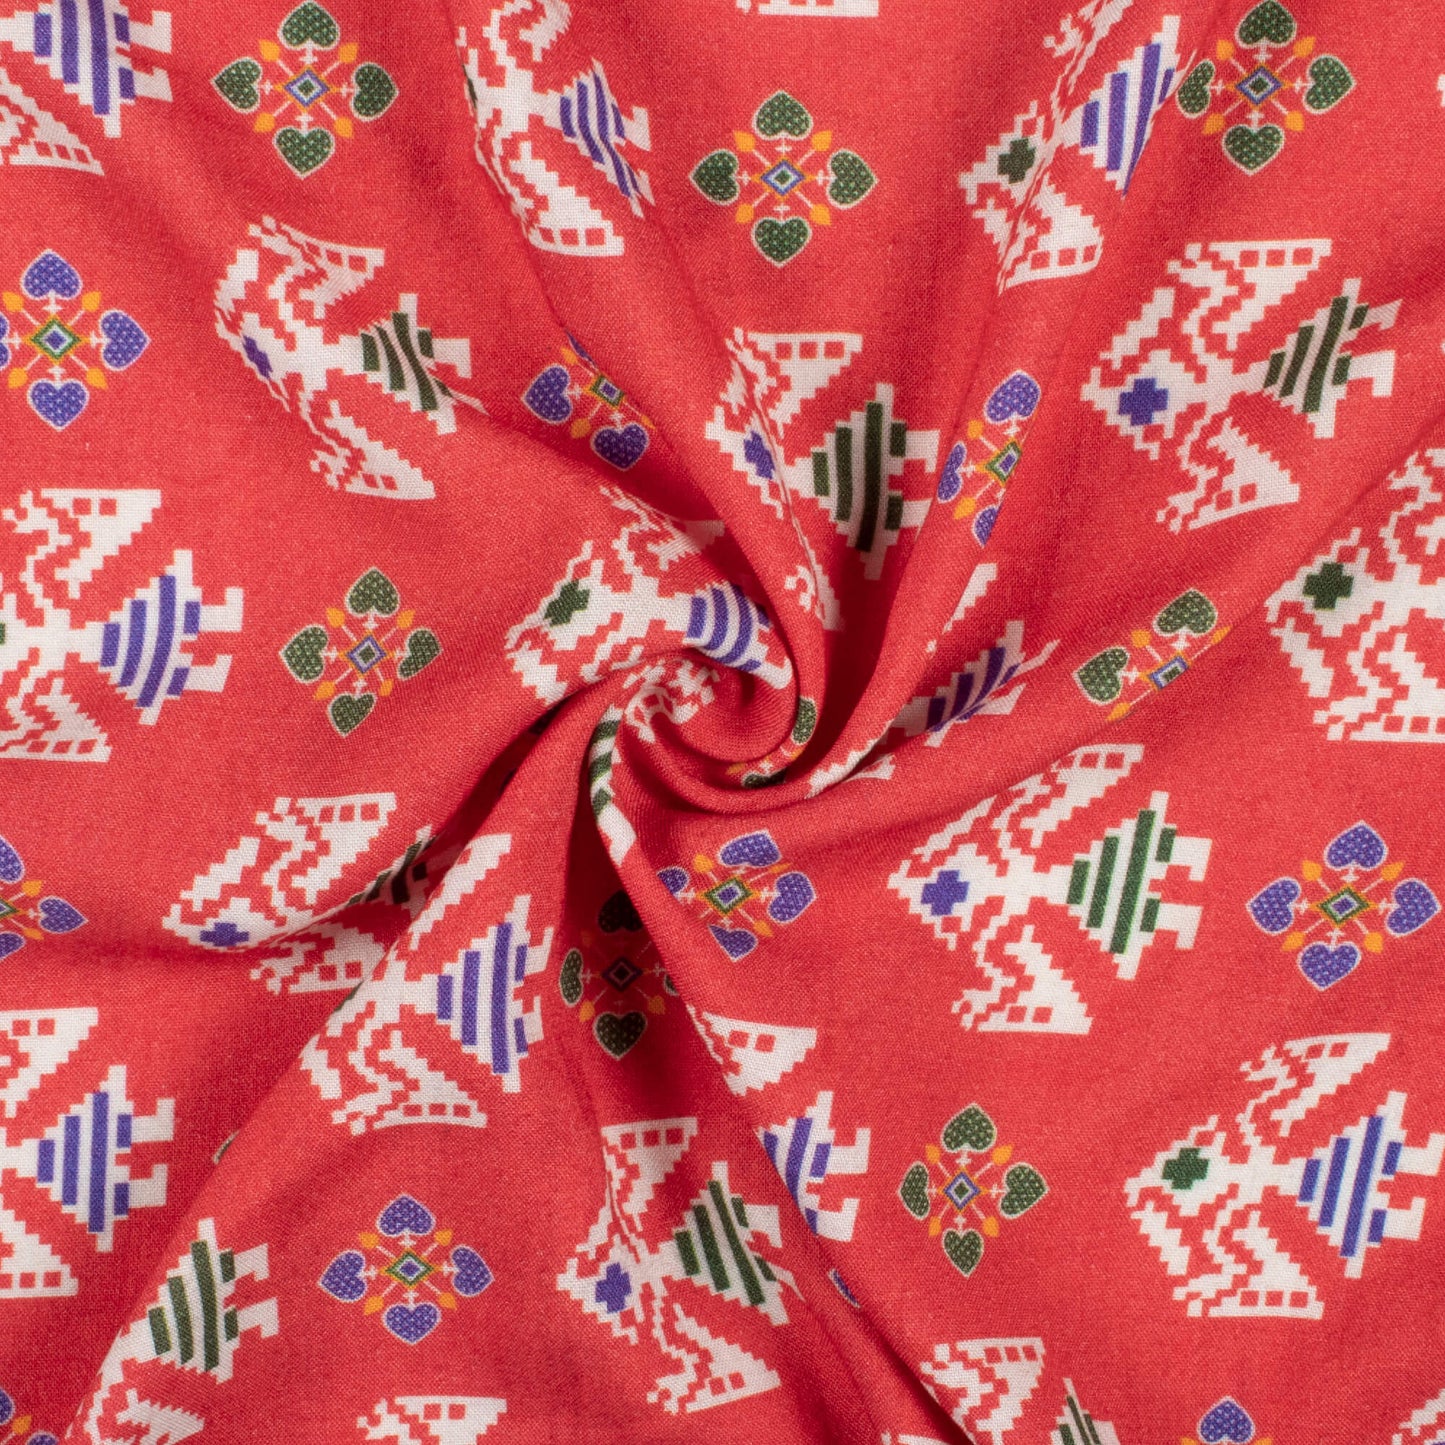 Vermilion Red And White Patola Pattern Digital Print Viscose Rayon Fabric (Width 58 Inches)